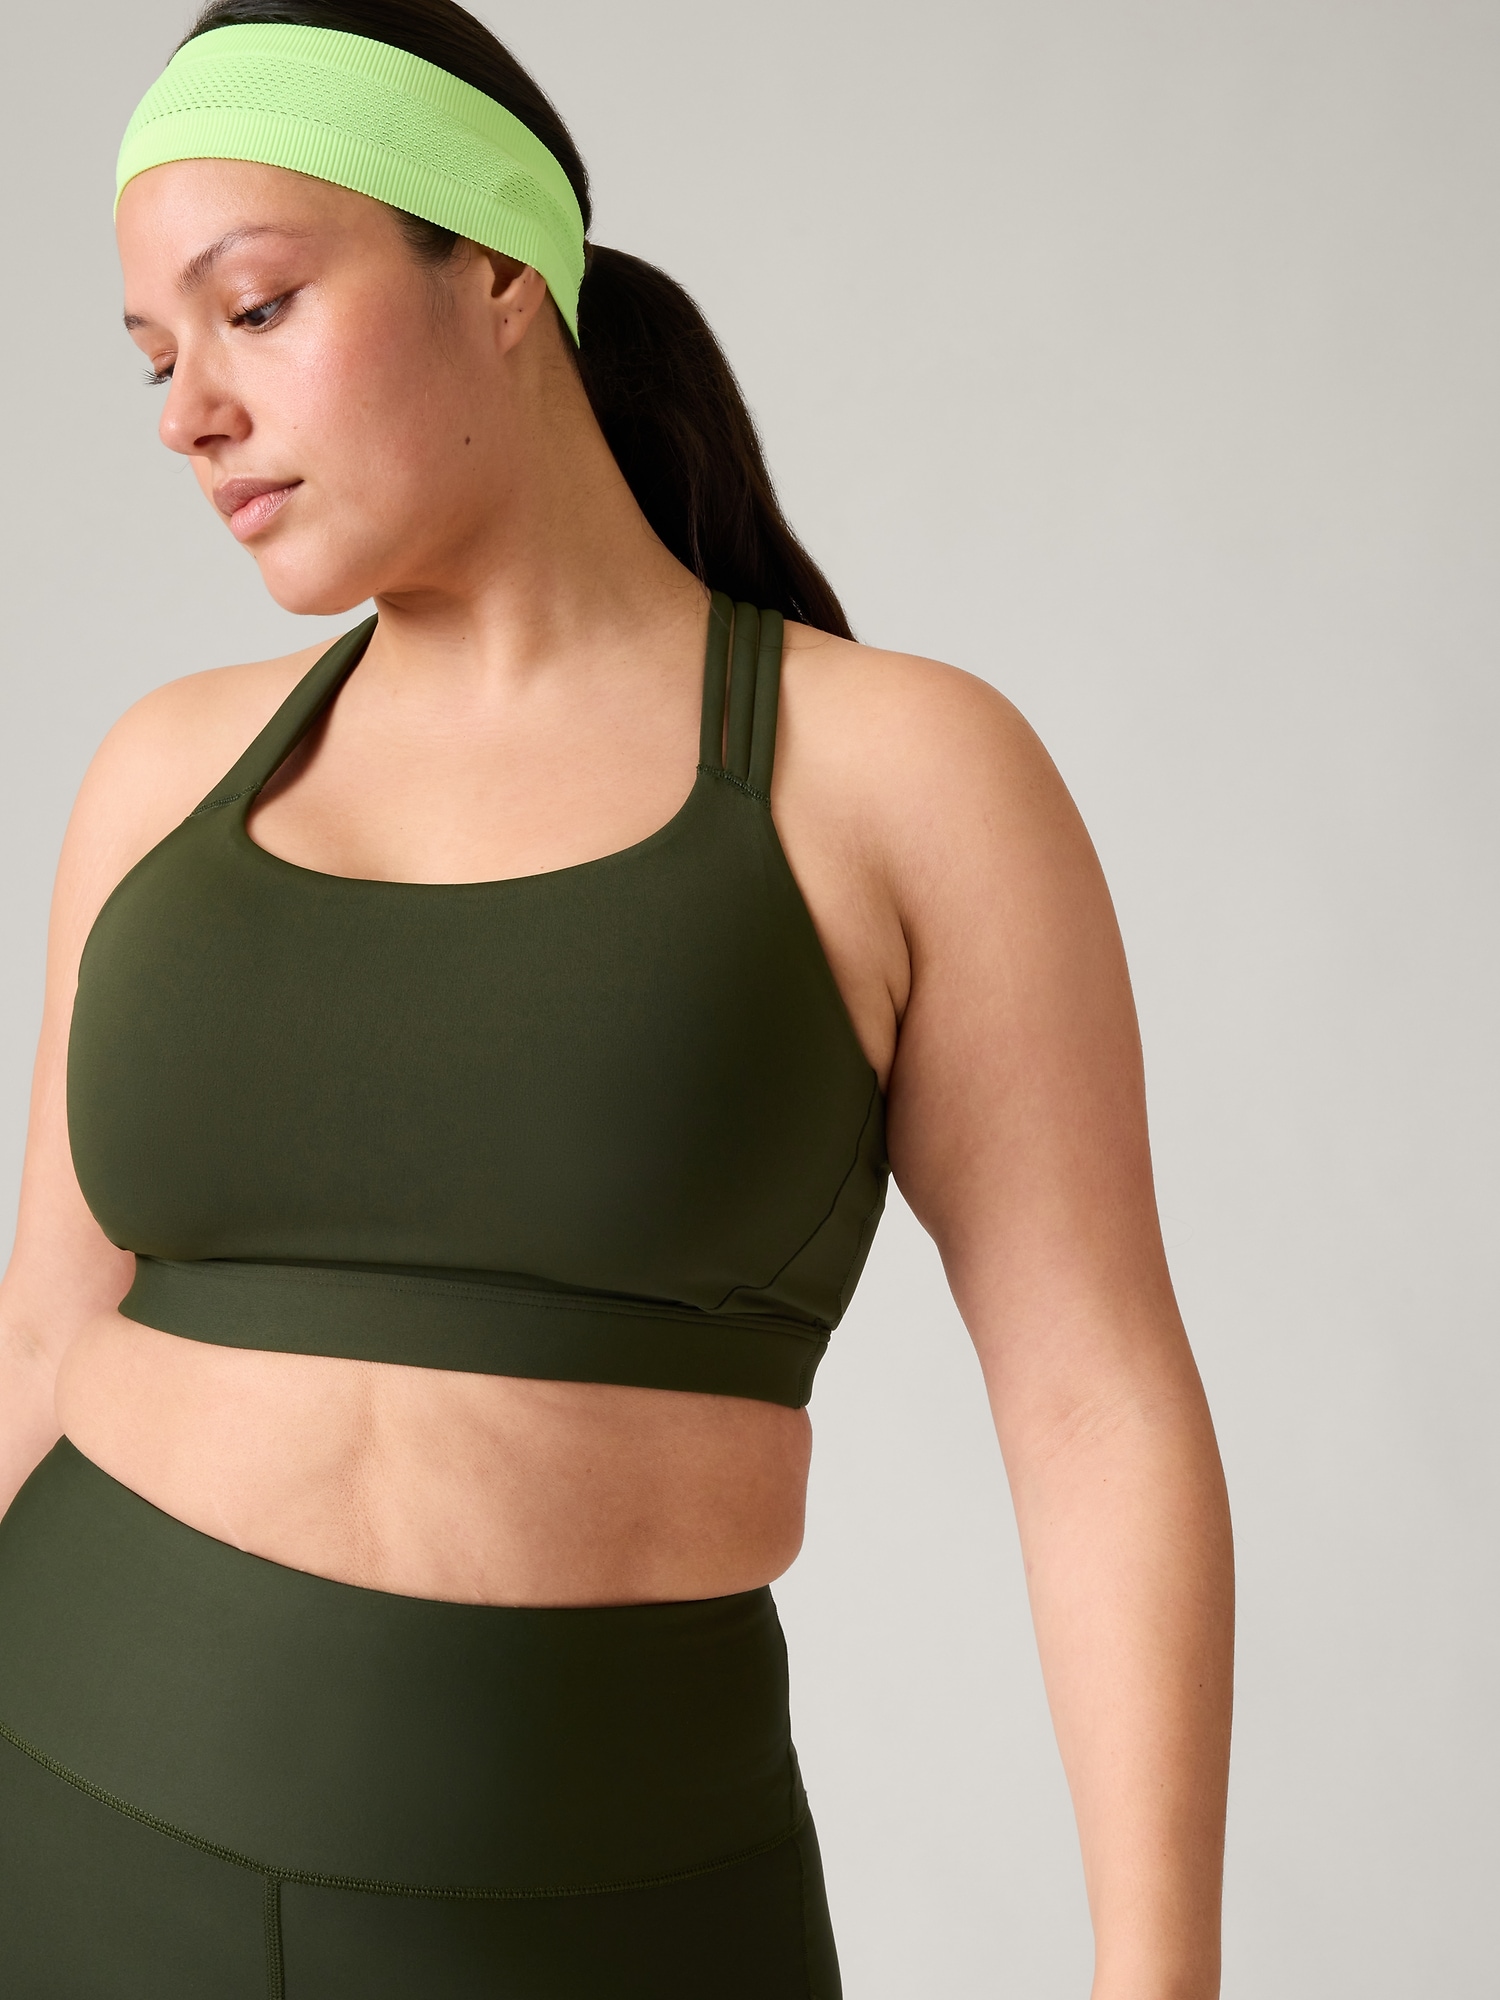 25 Sports Bras People With DD+ Boobs Actually Swear By